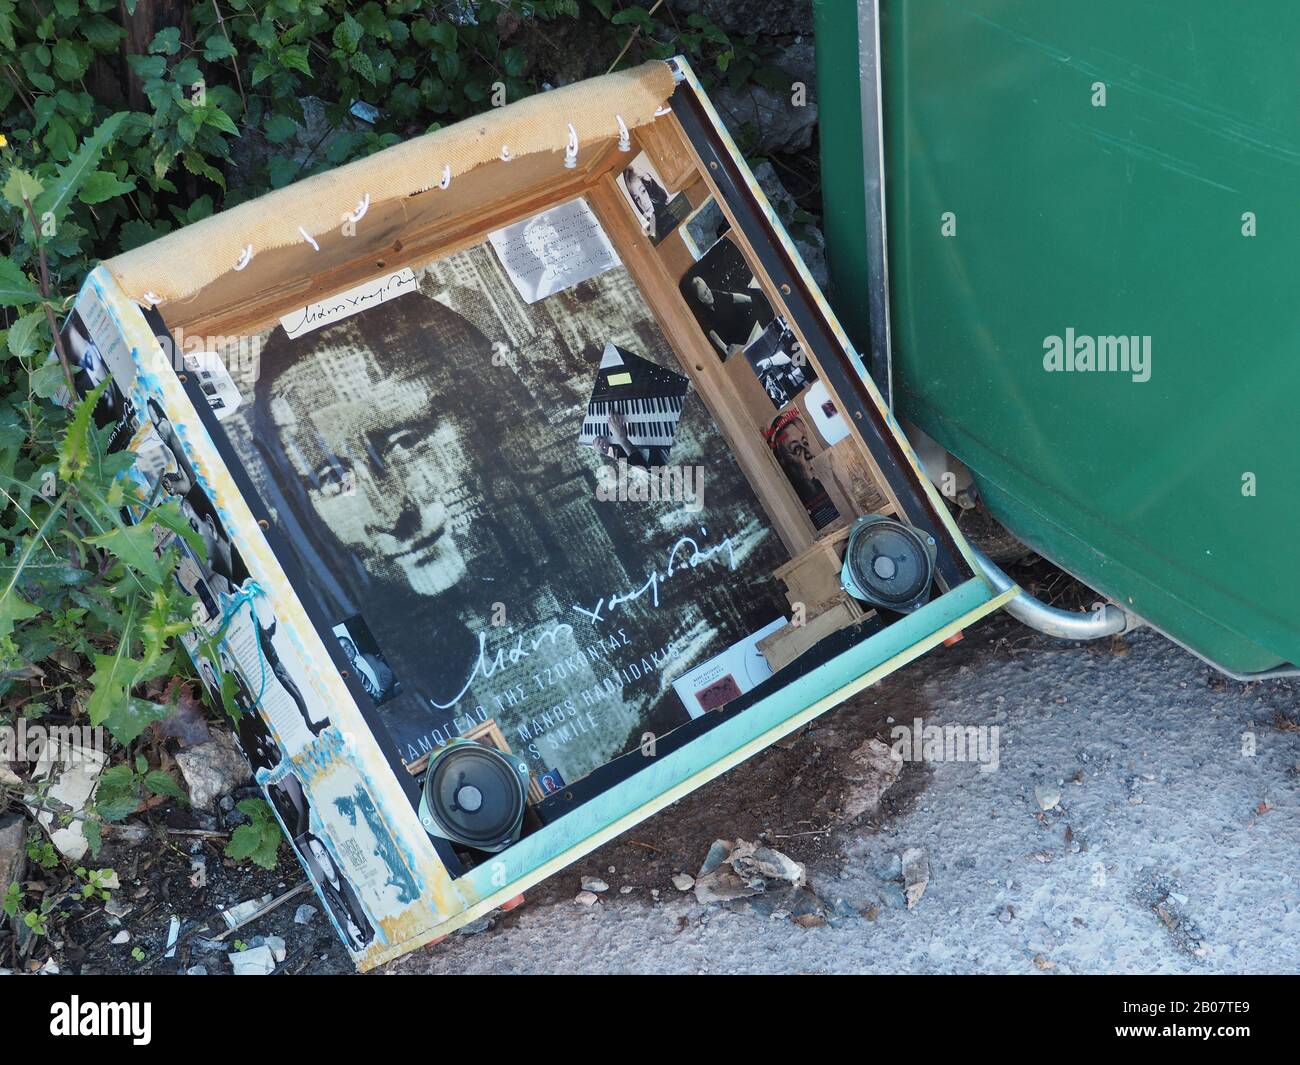 Giaconda's Smile. Manos Hatzidakis / Marianna Xenaki LP album cover used as part of a home made music system. Discarded by rubbish skip. Stock Photo